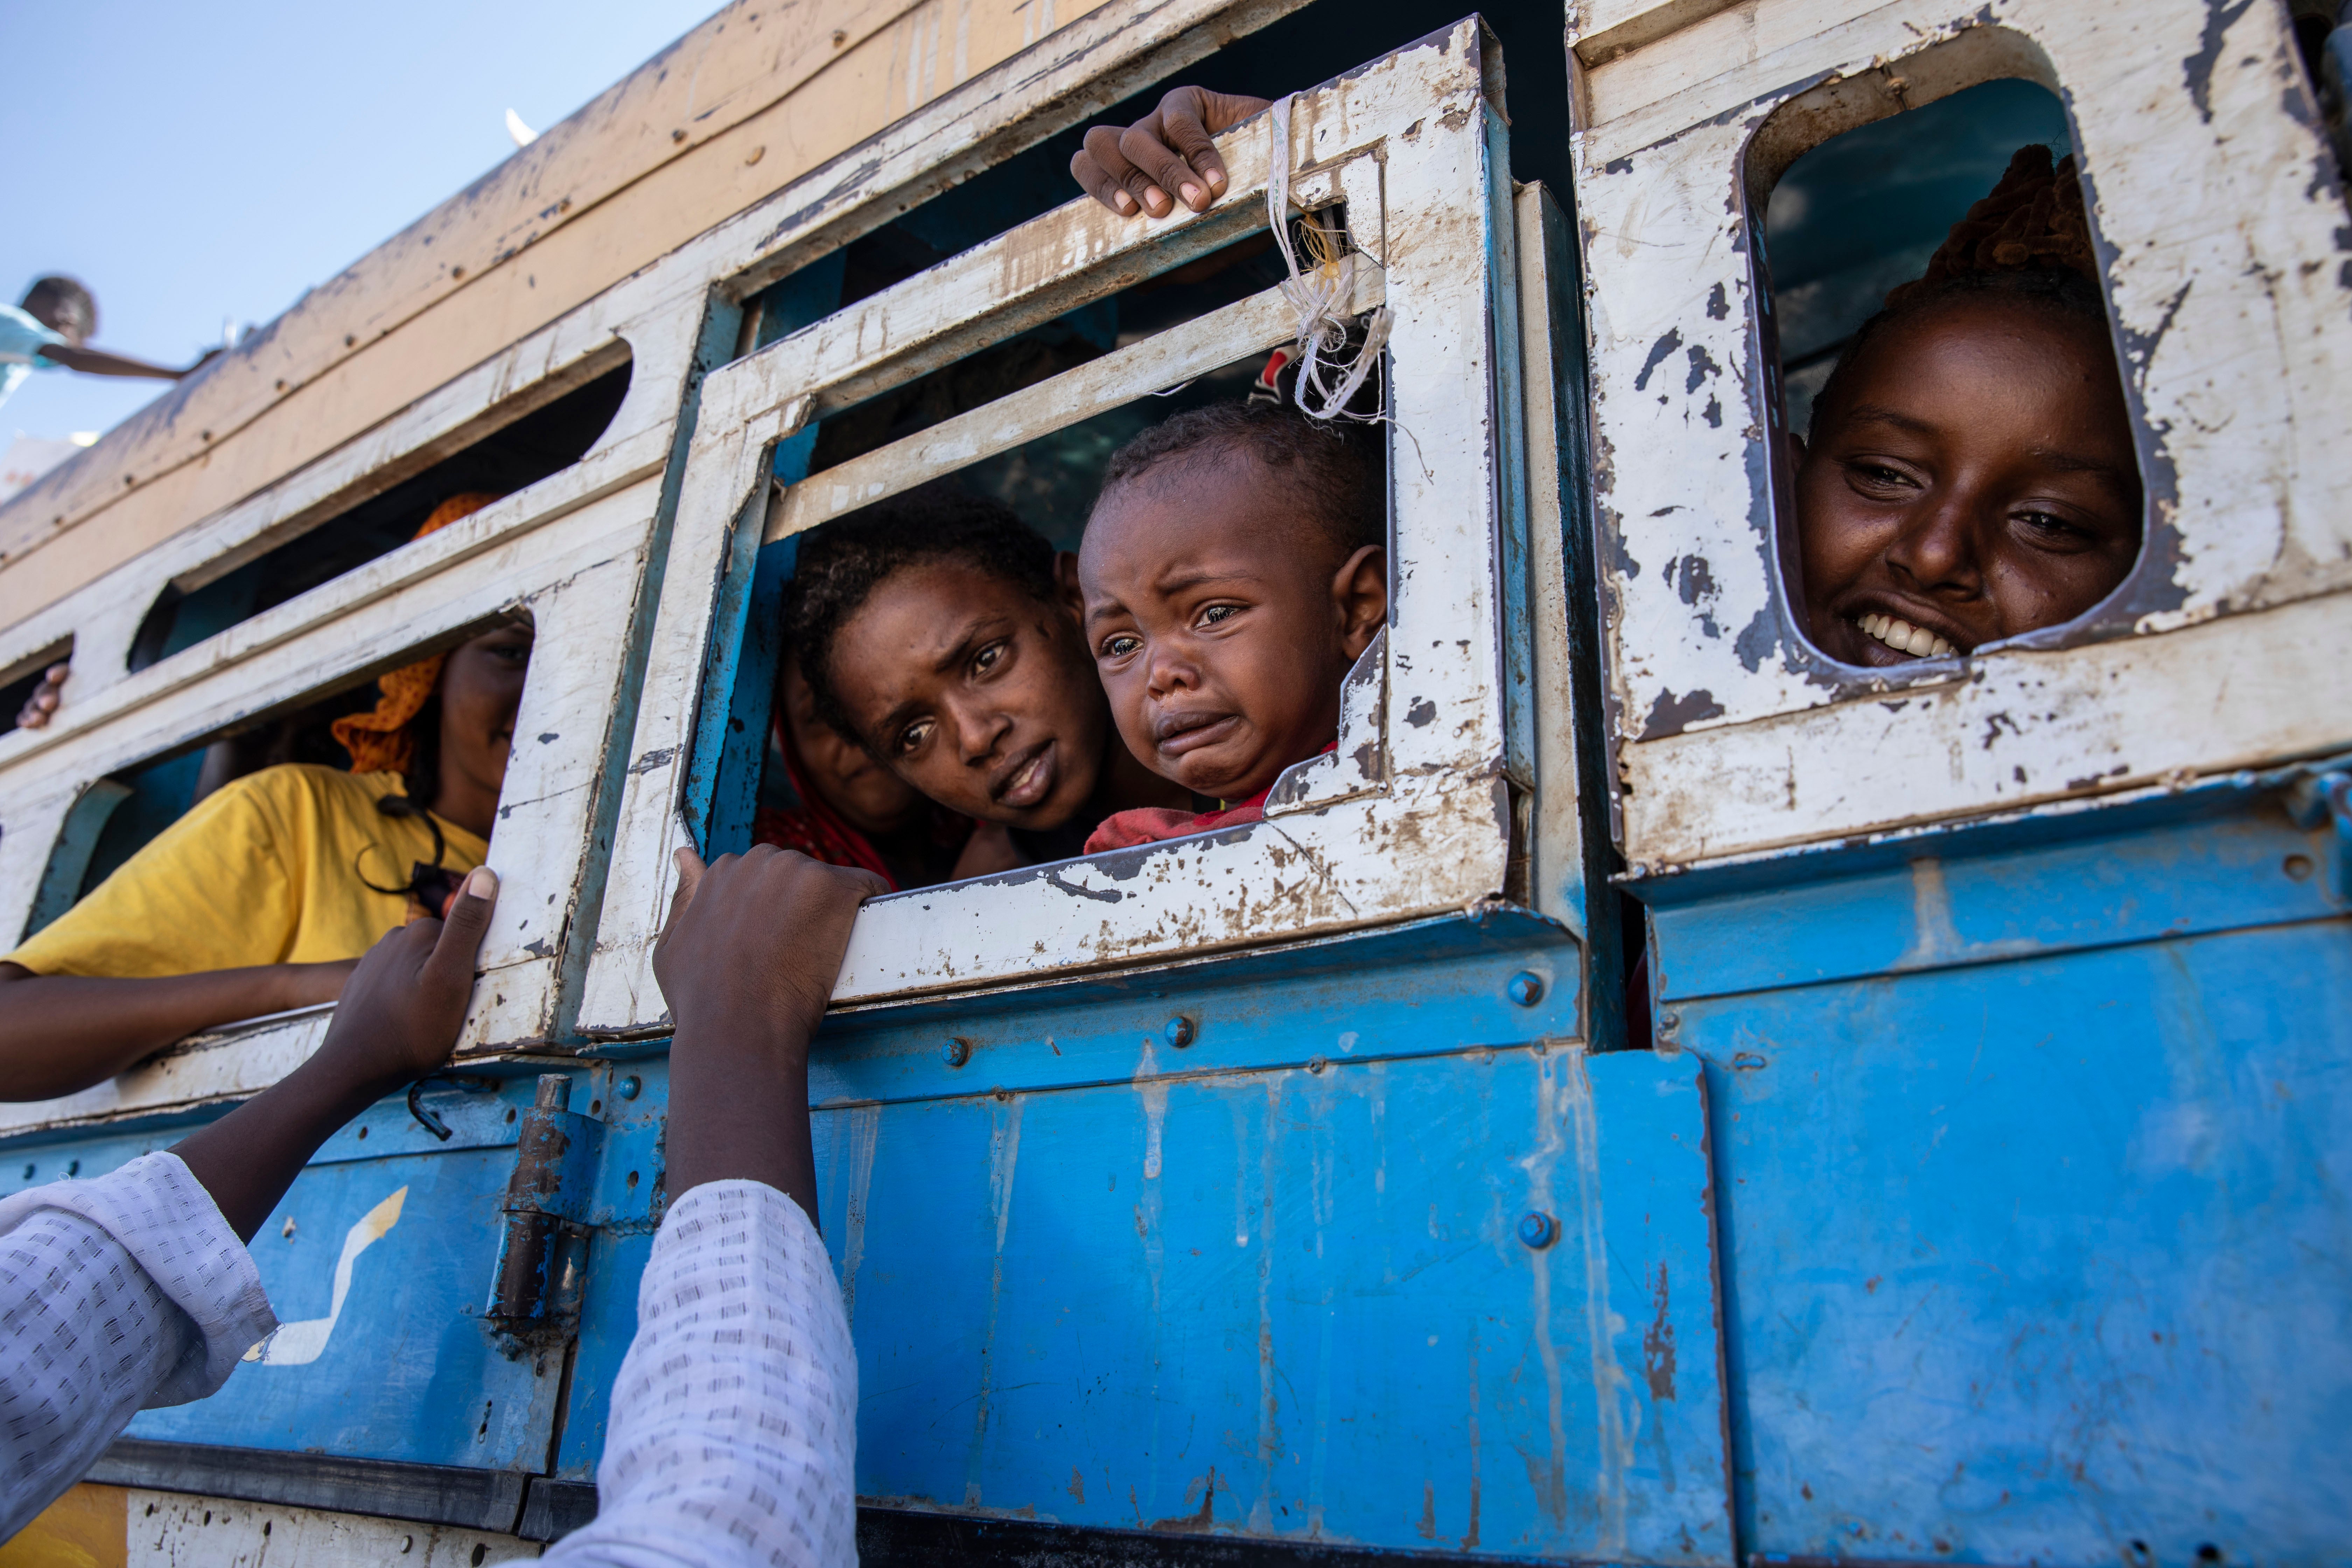 Tigray refugees who fled the conflict en route to temporary accommodation